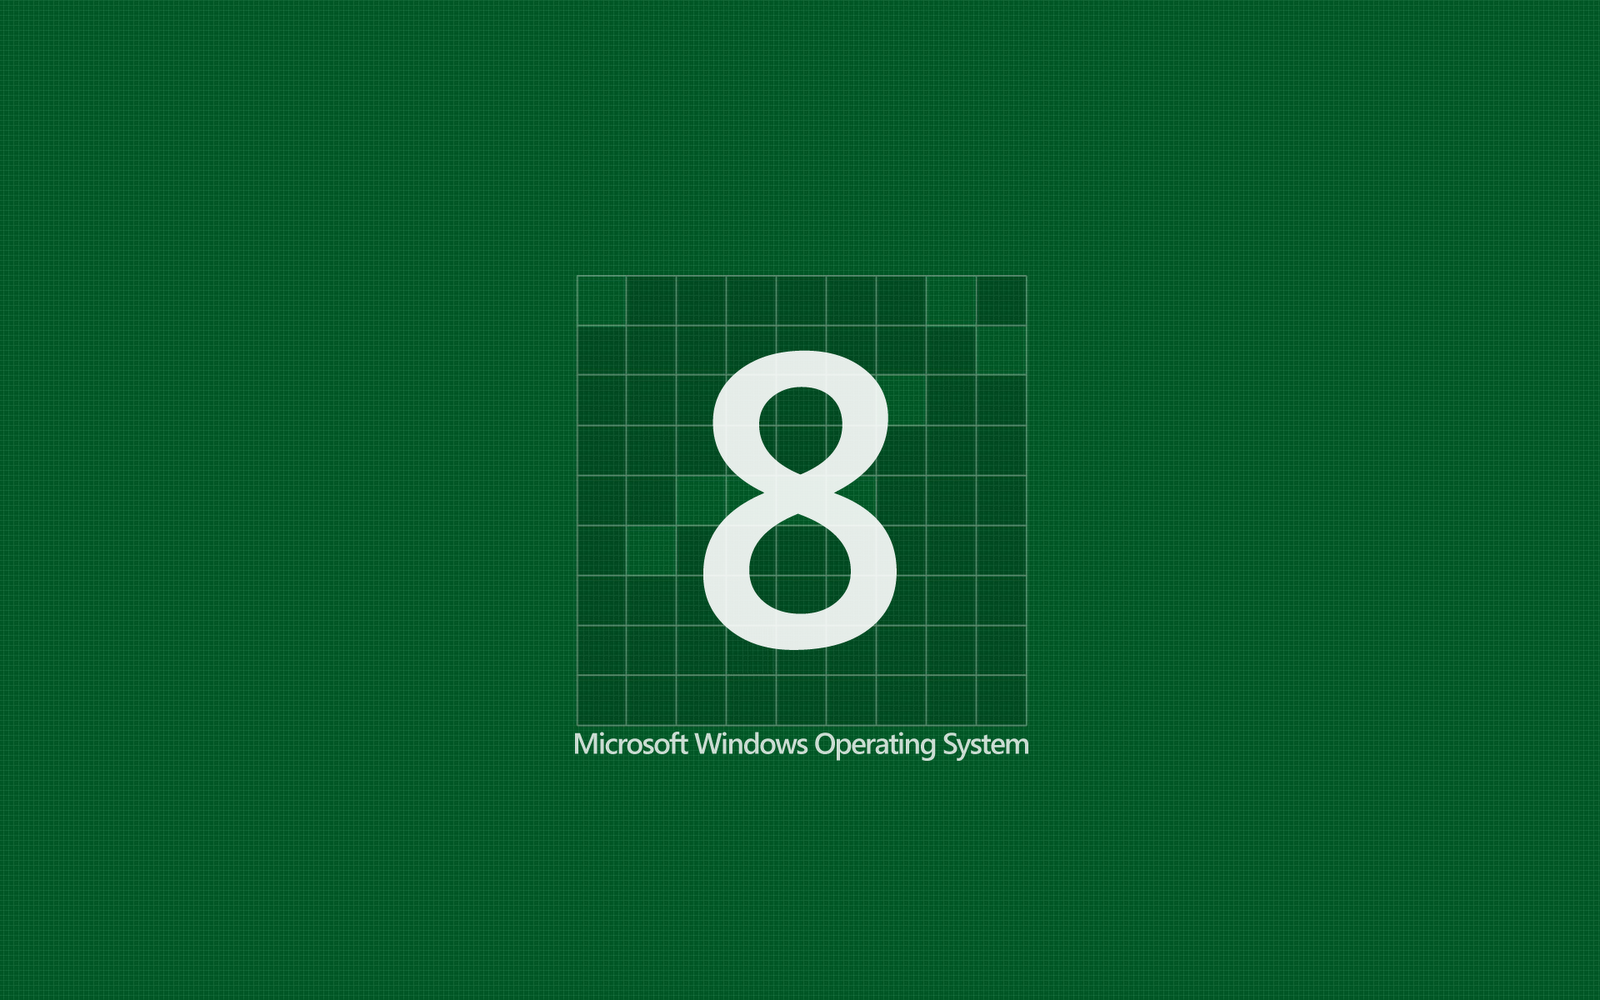 are disclosing 70 Coolest Official and Unofficial Windows 8 Wallpaper